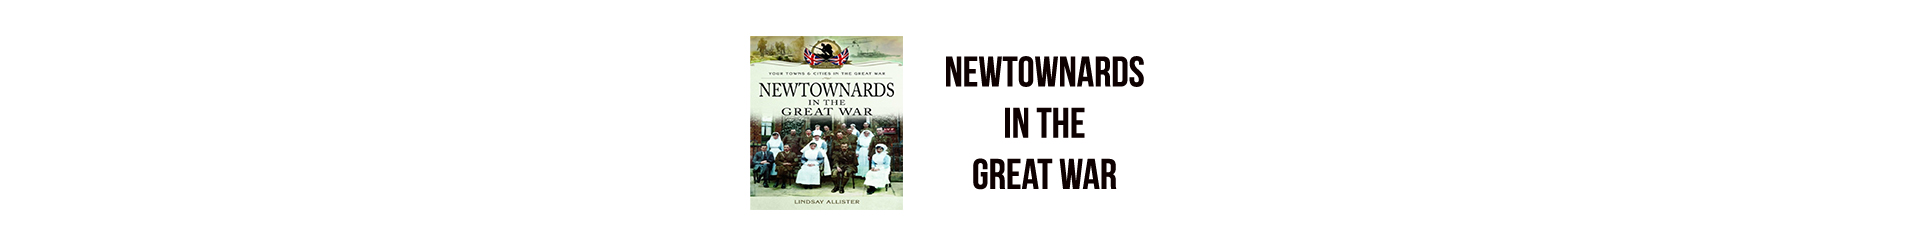 Newtownards in the Great War by Lindsay Allister